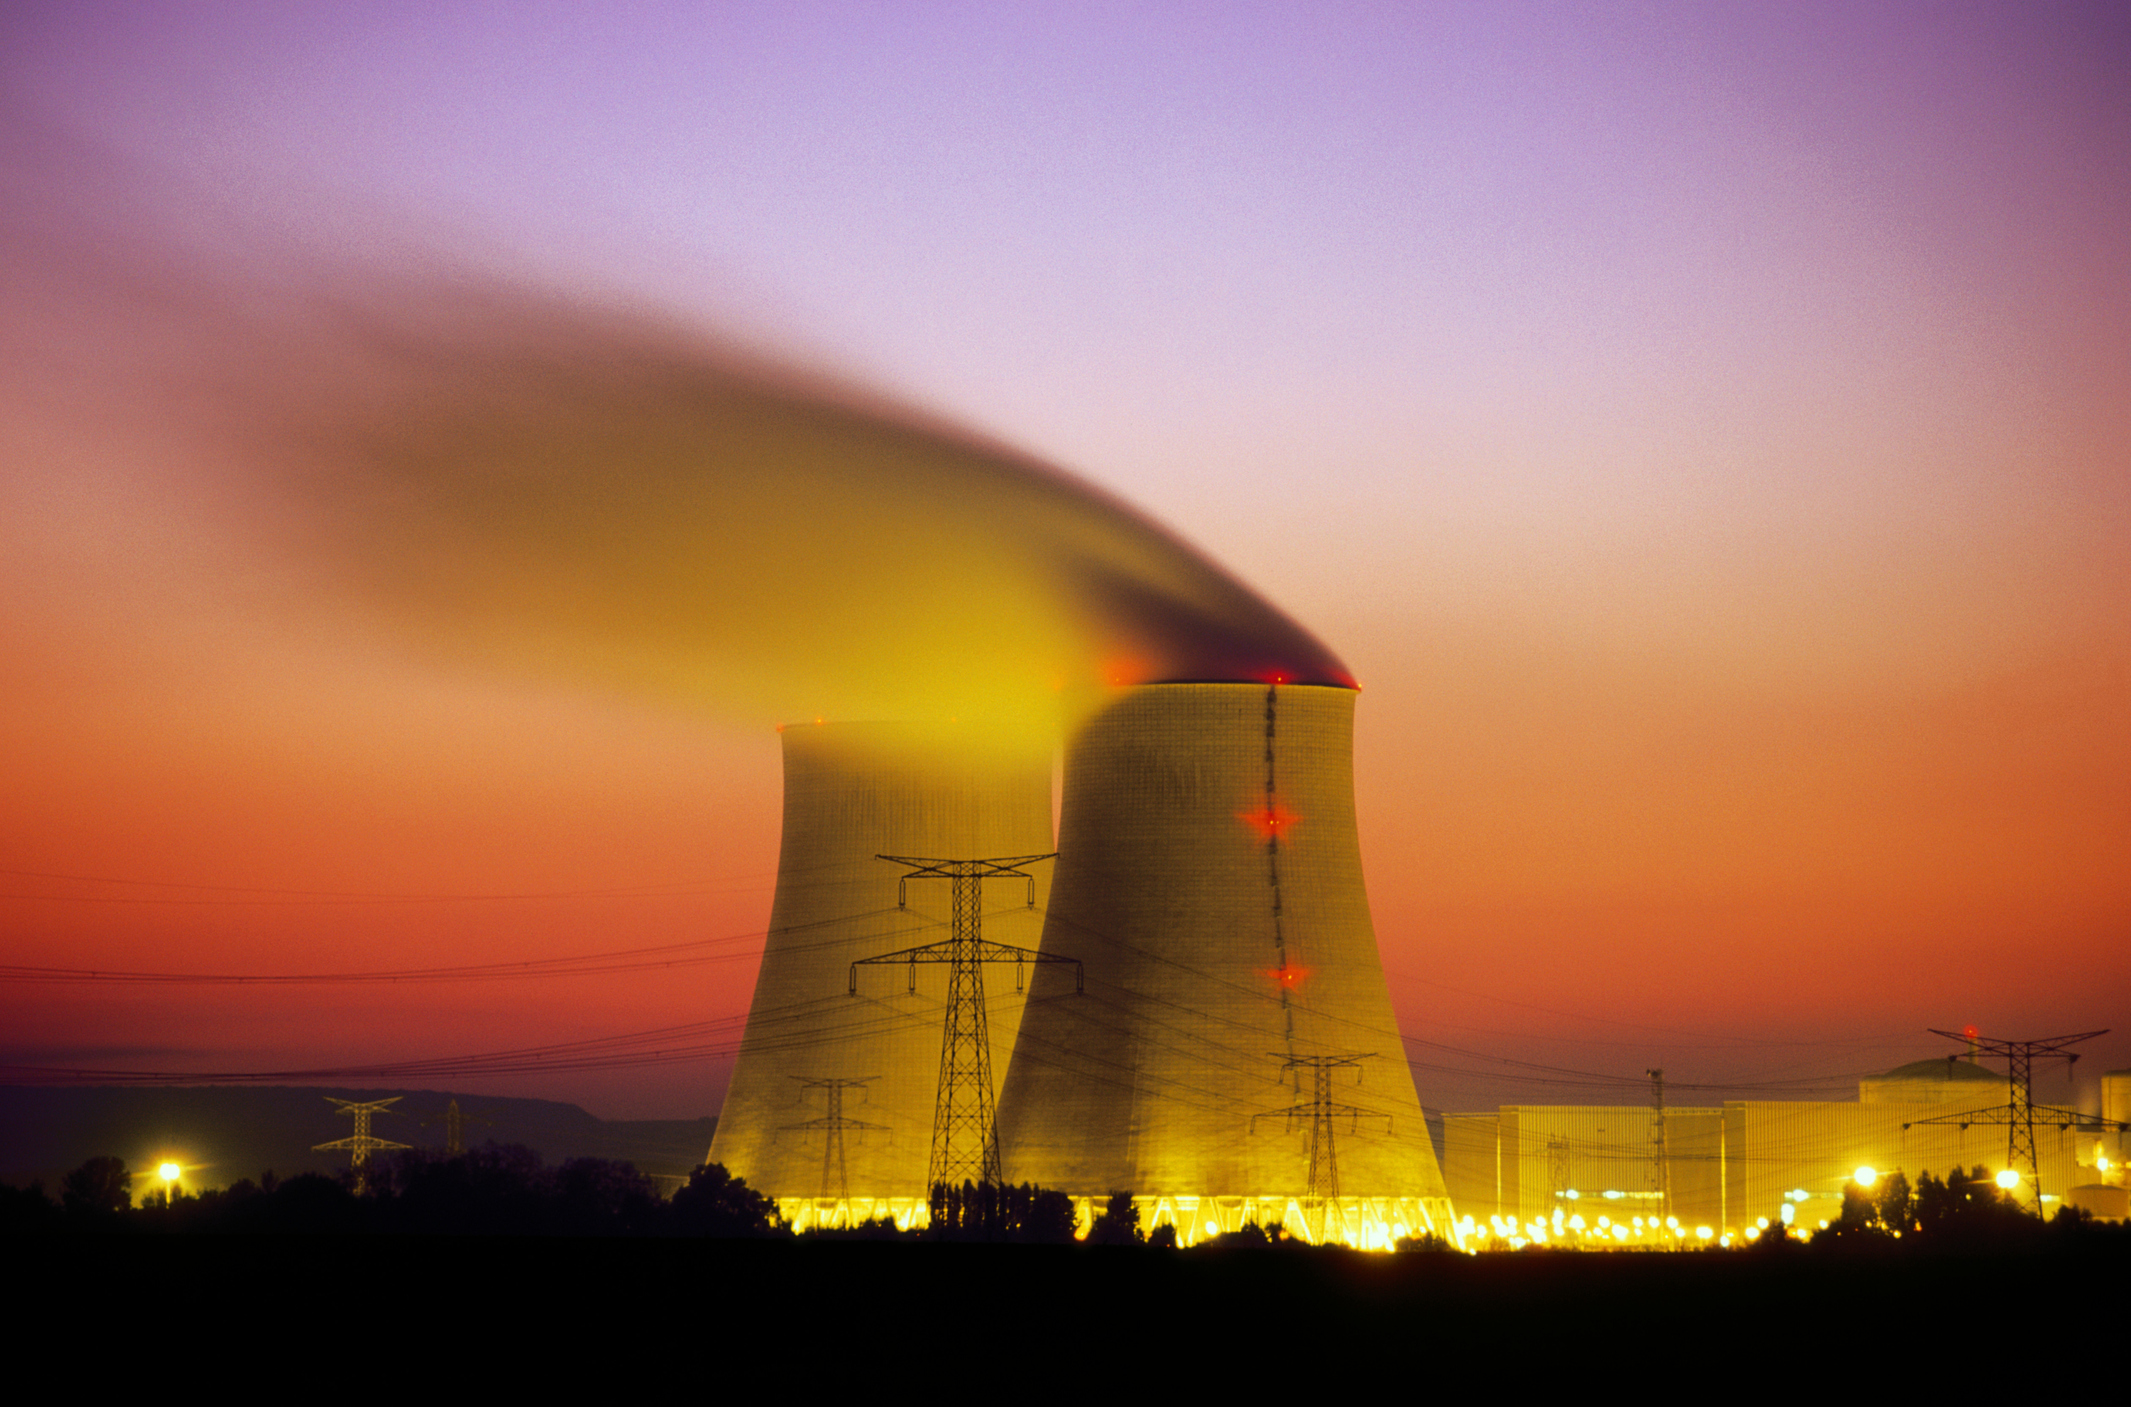 A nuclear cooling tower at sunset.